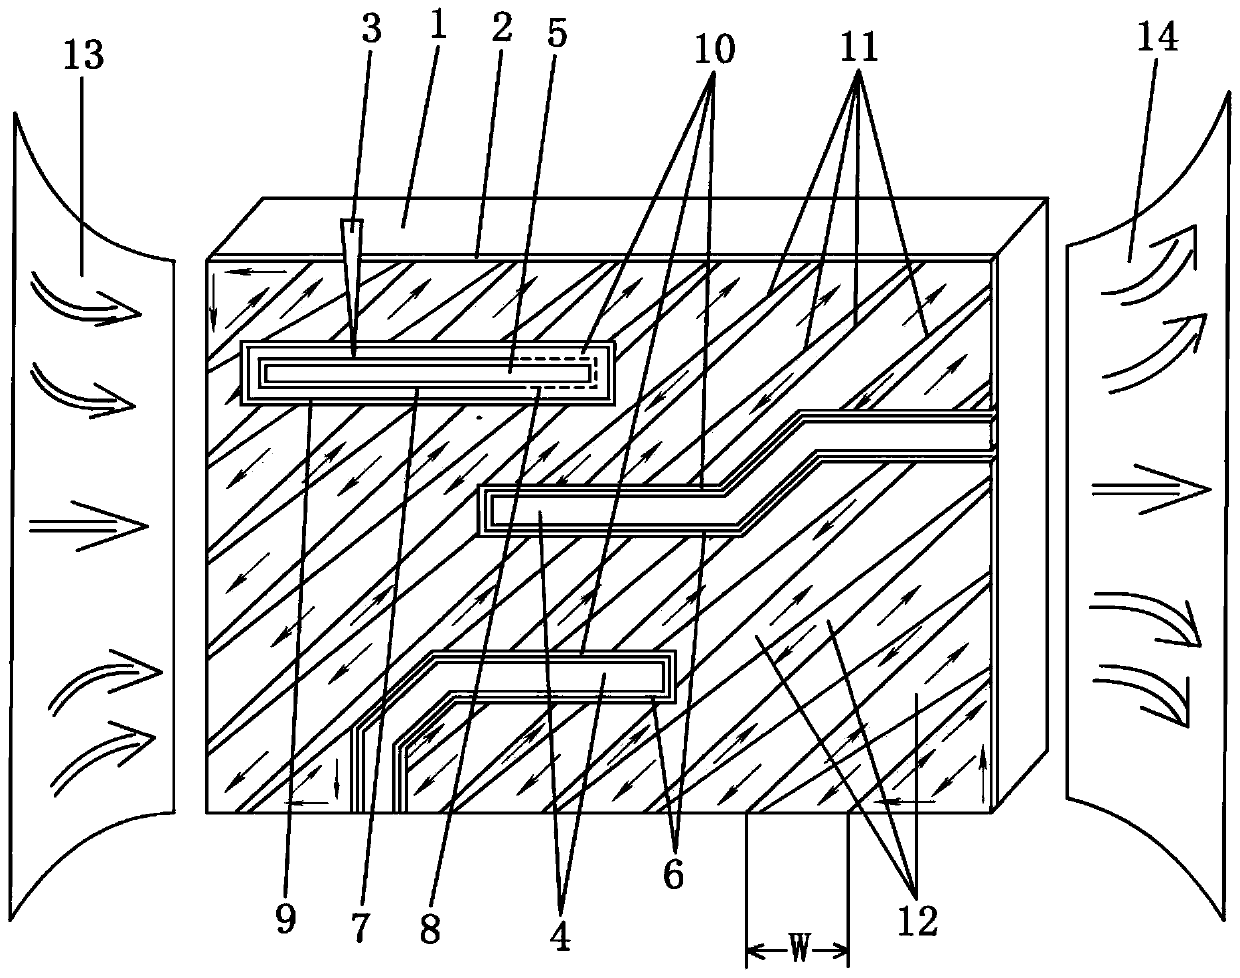 Method for selectively removing conductive layer on baseplate material